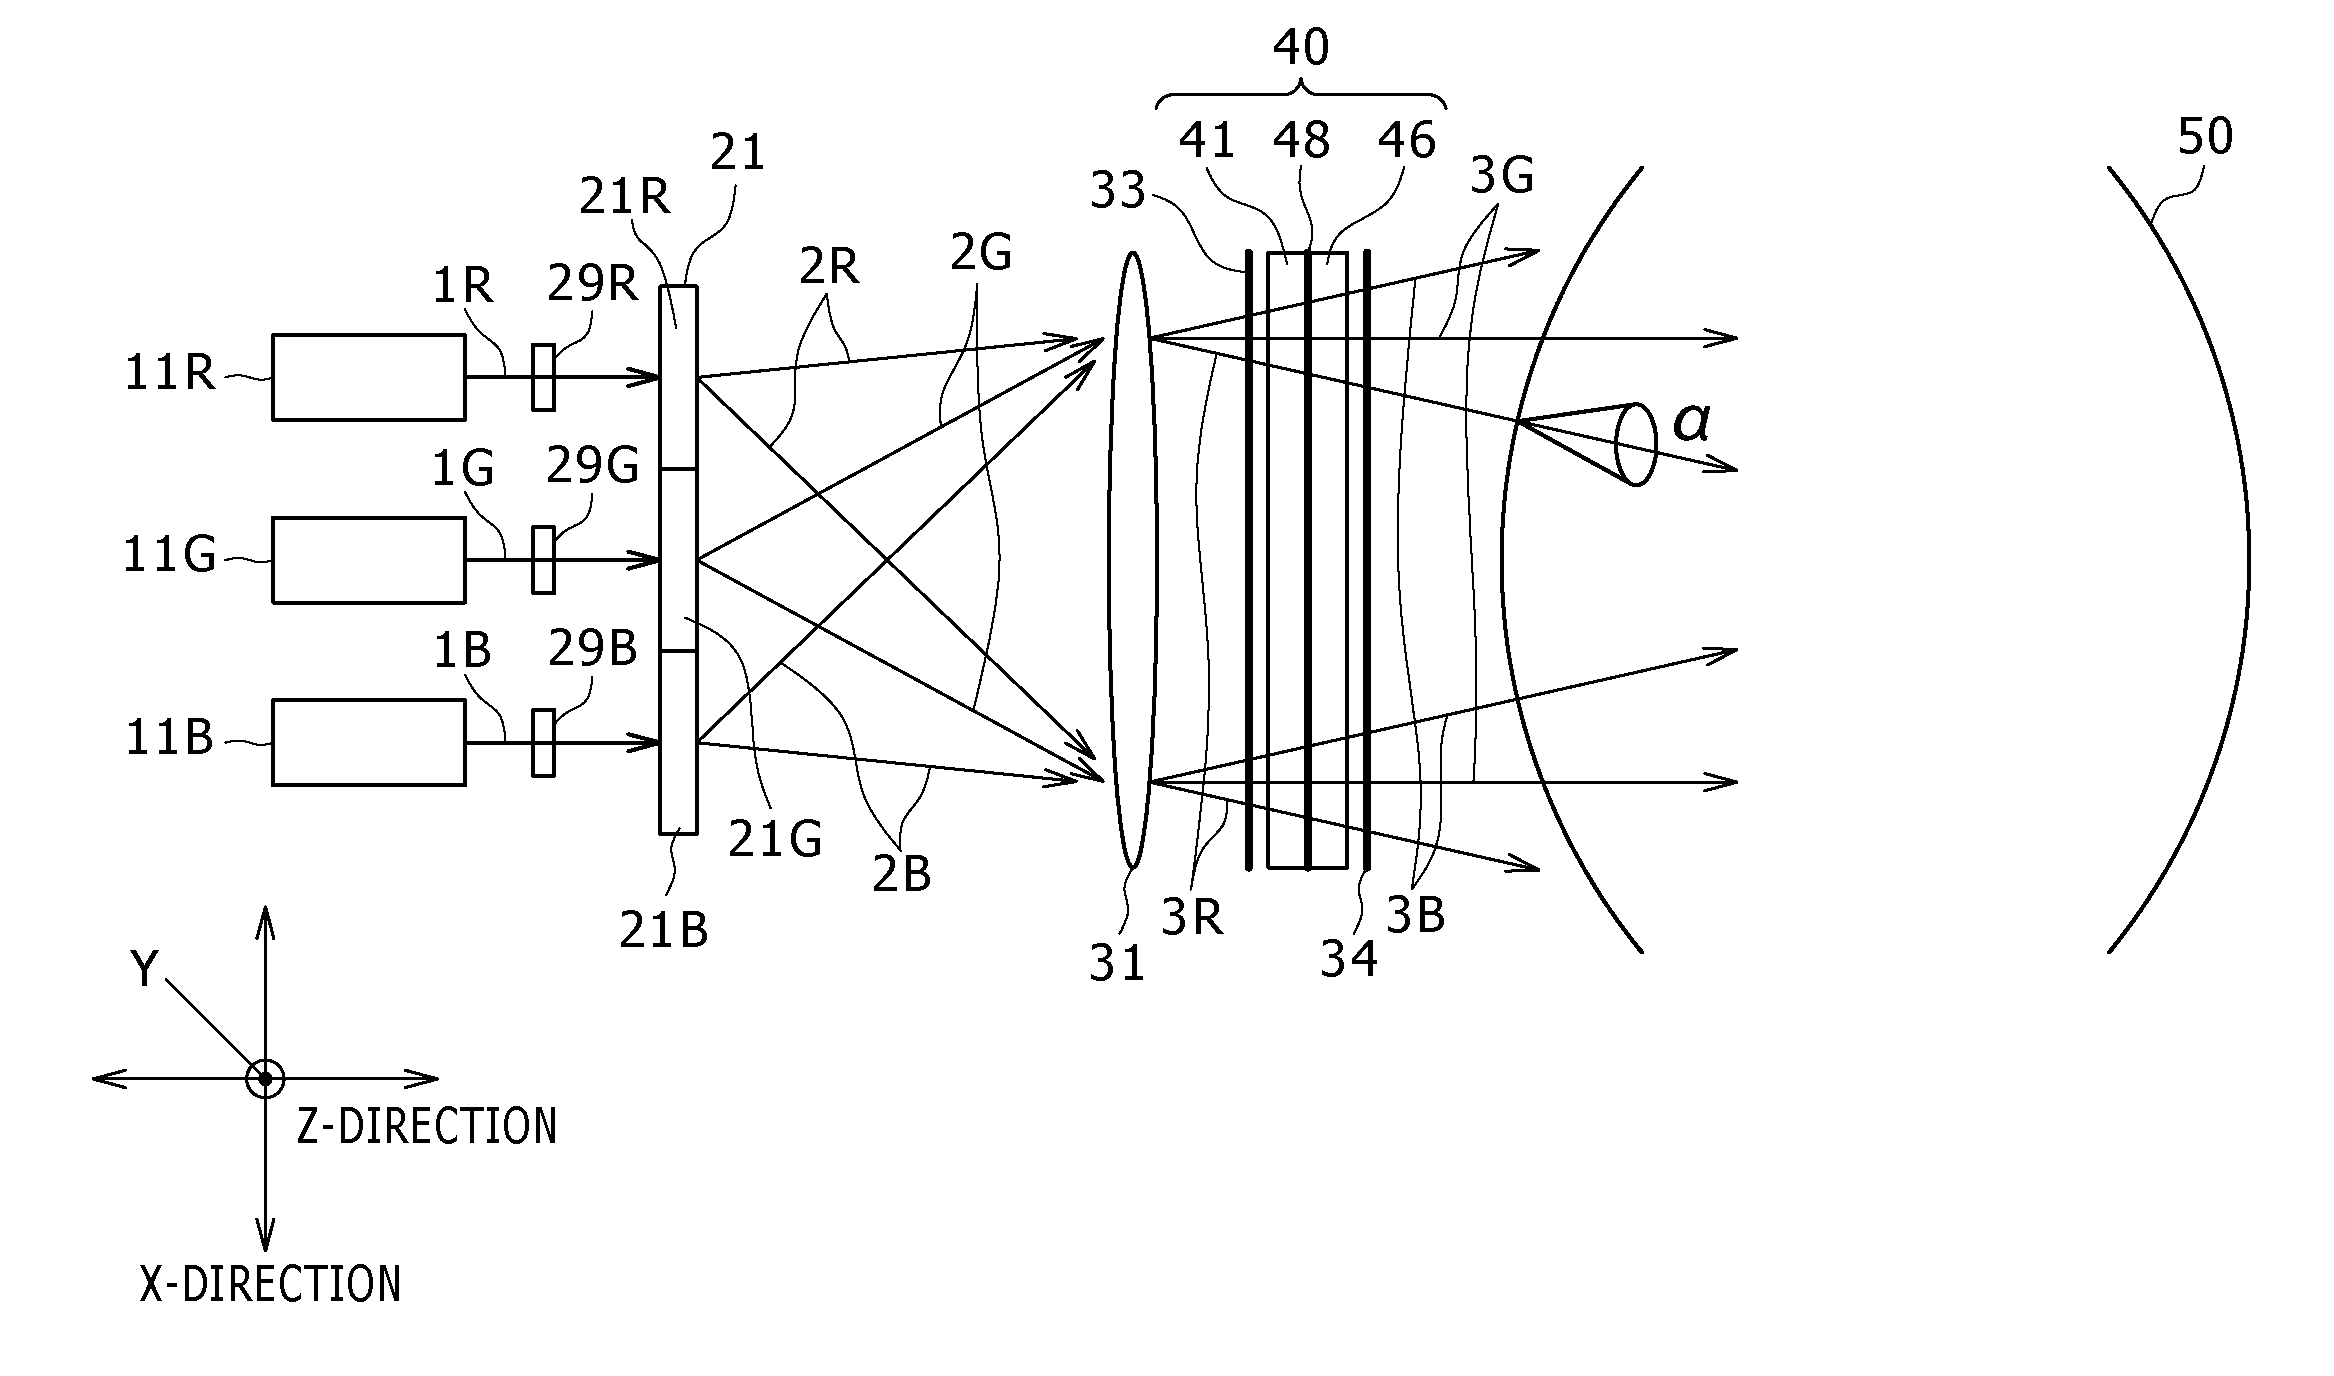 Liquid crystal projector and image reproducing device